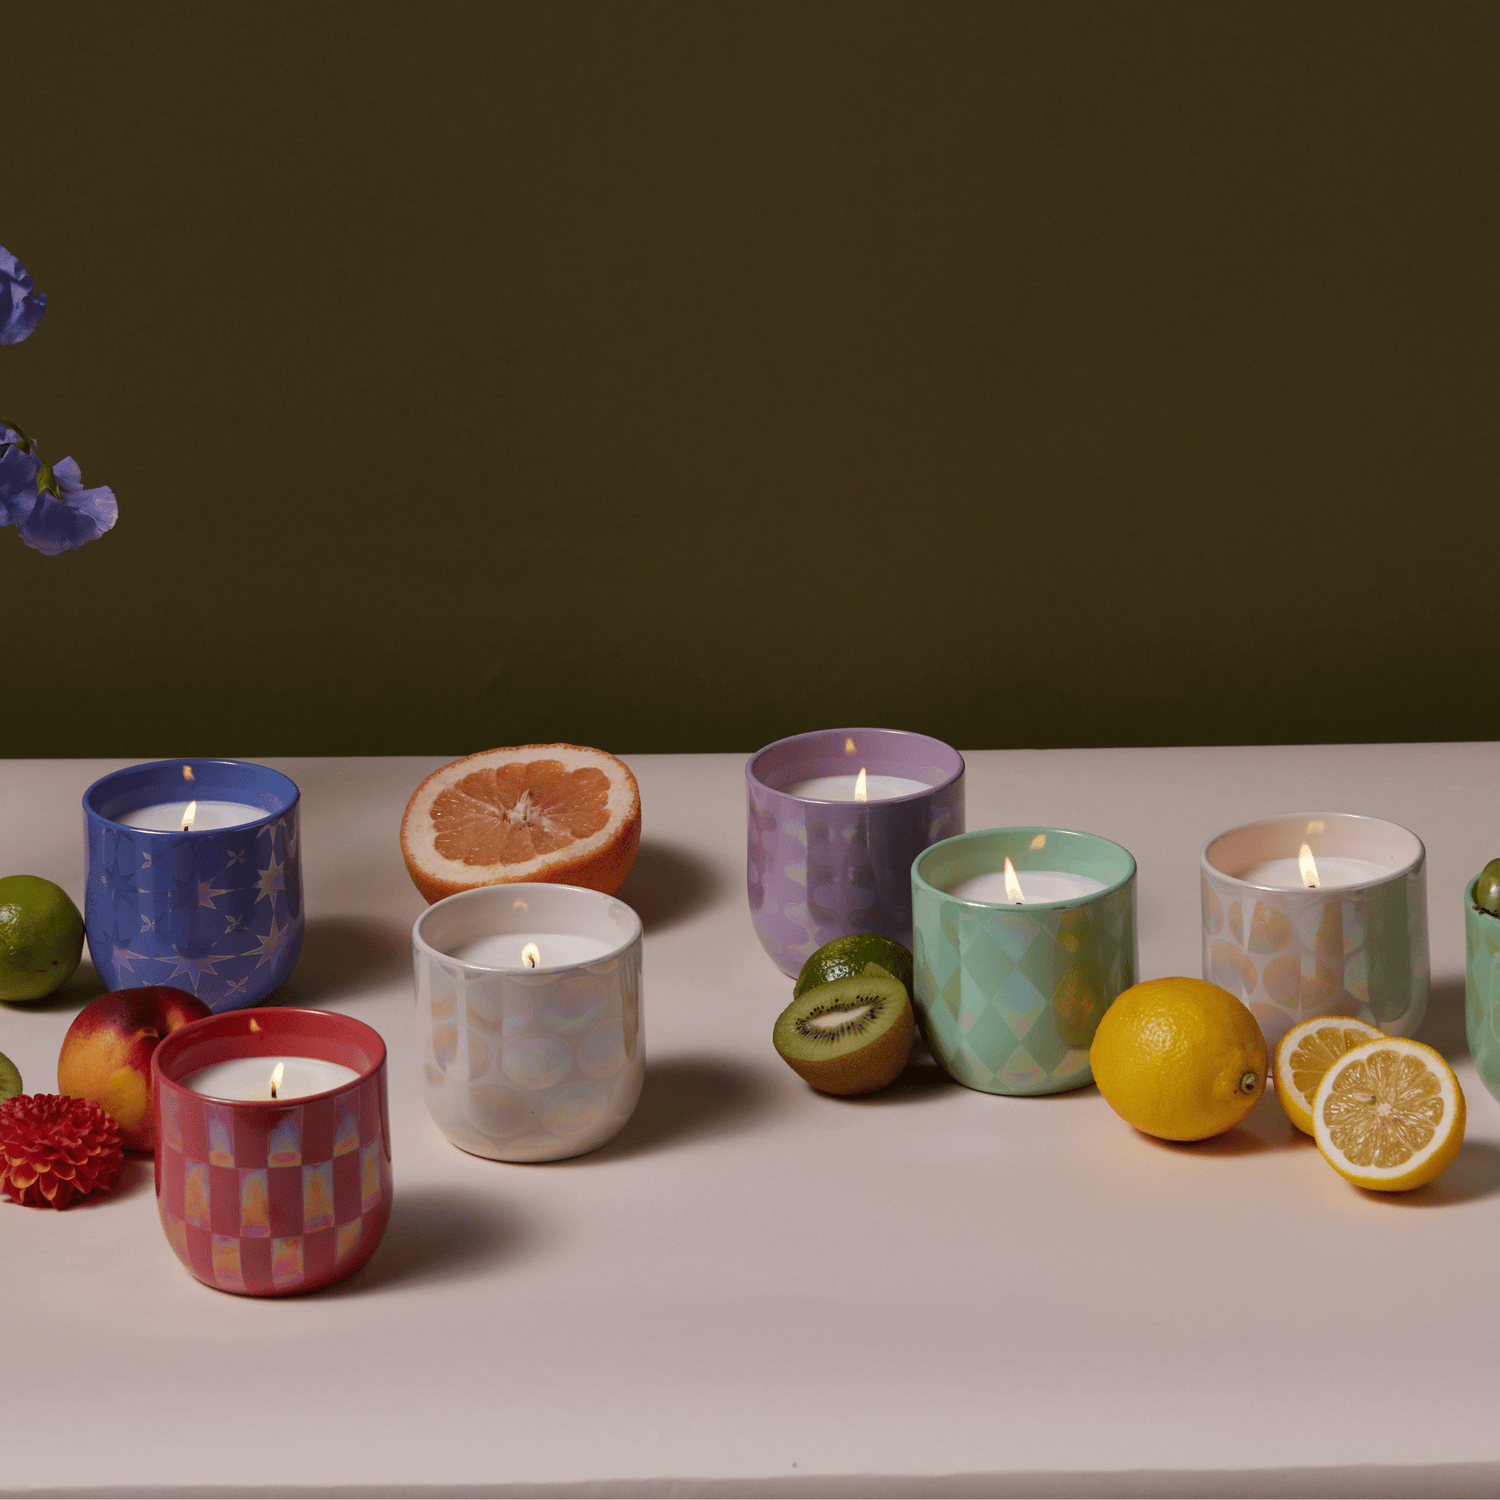 Lustre collection candles on a pale surface with fruit and a dark backdrop